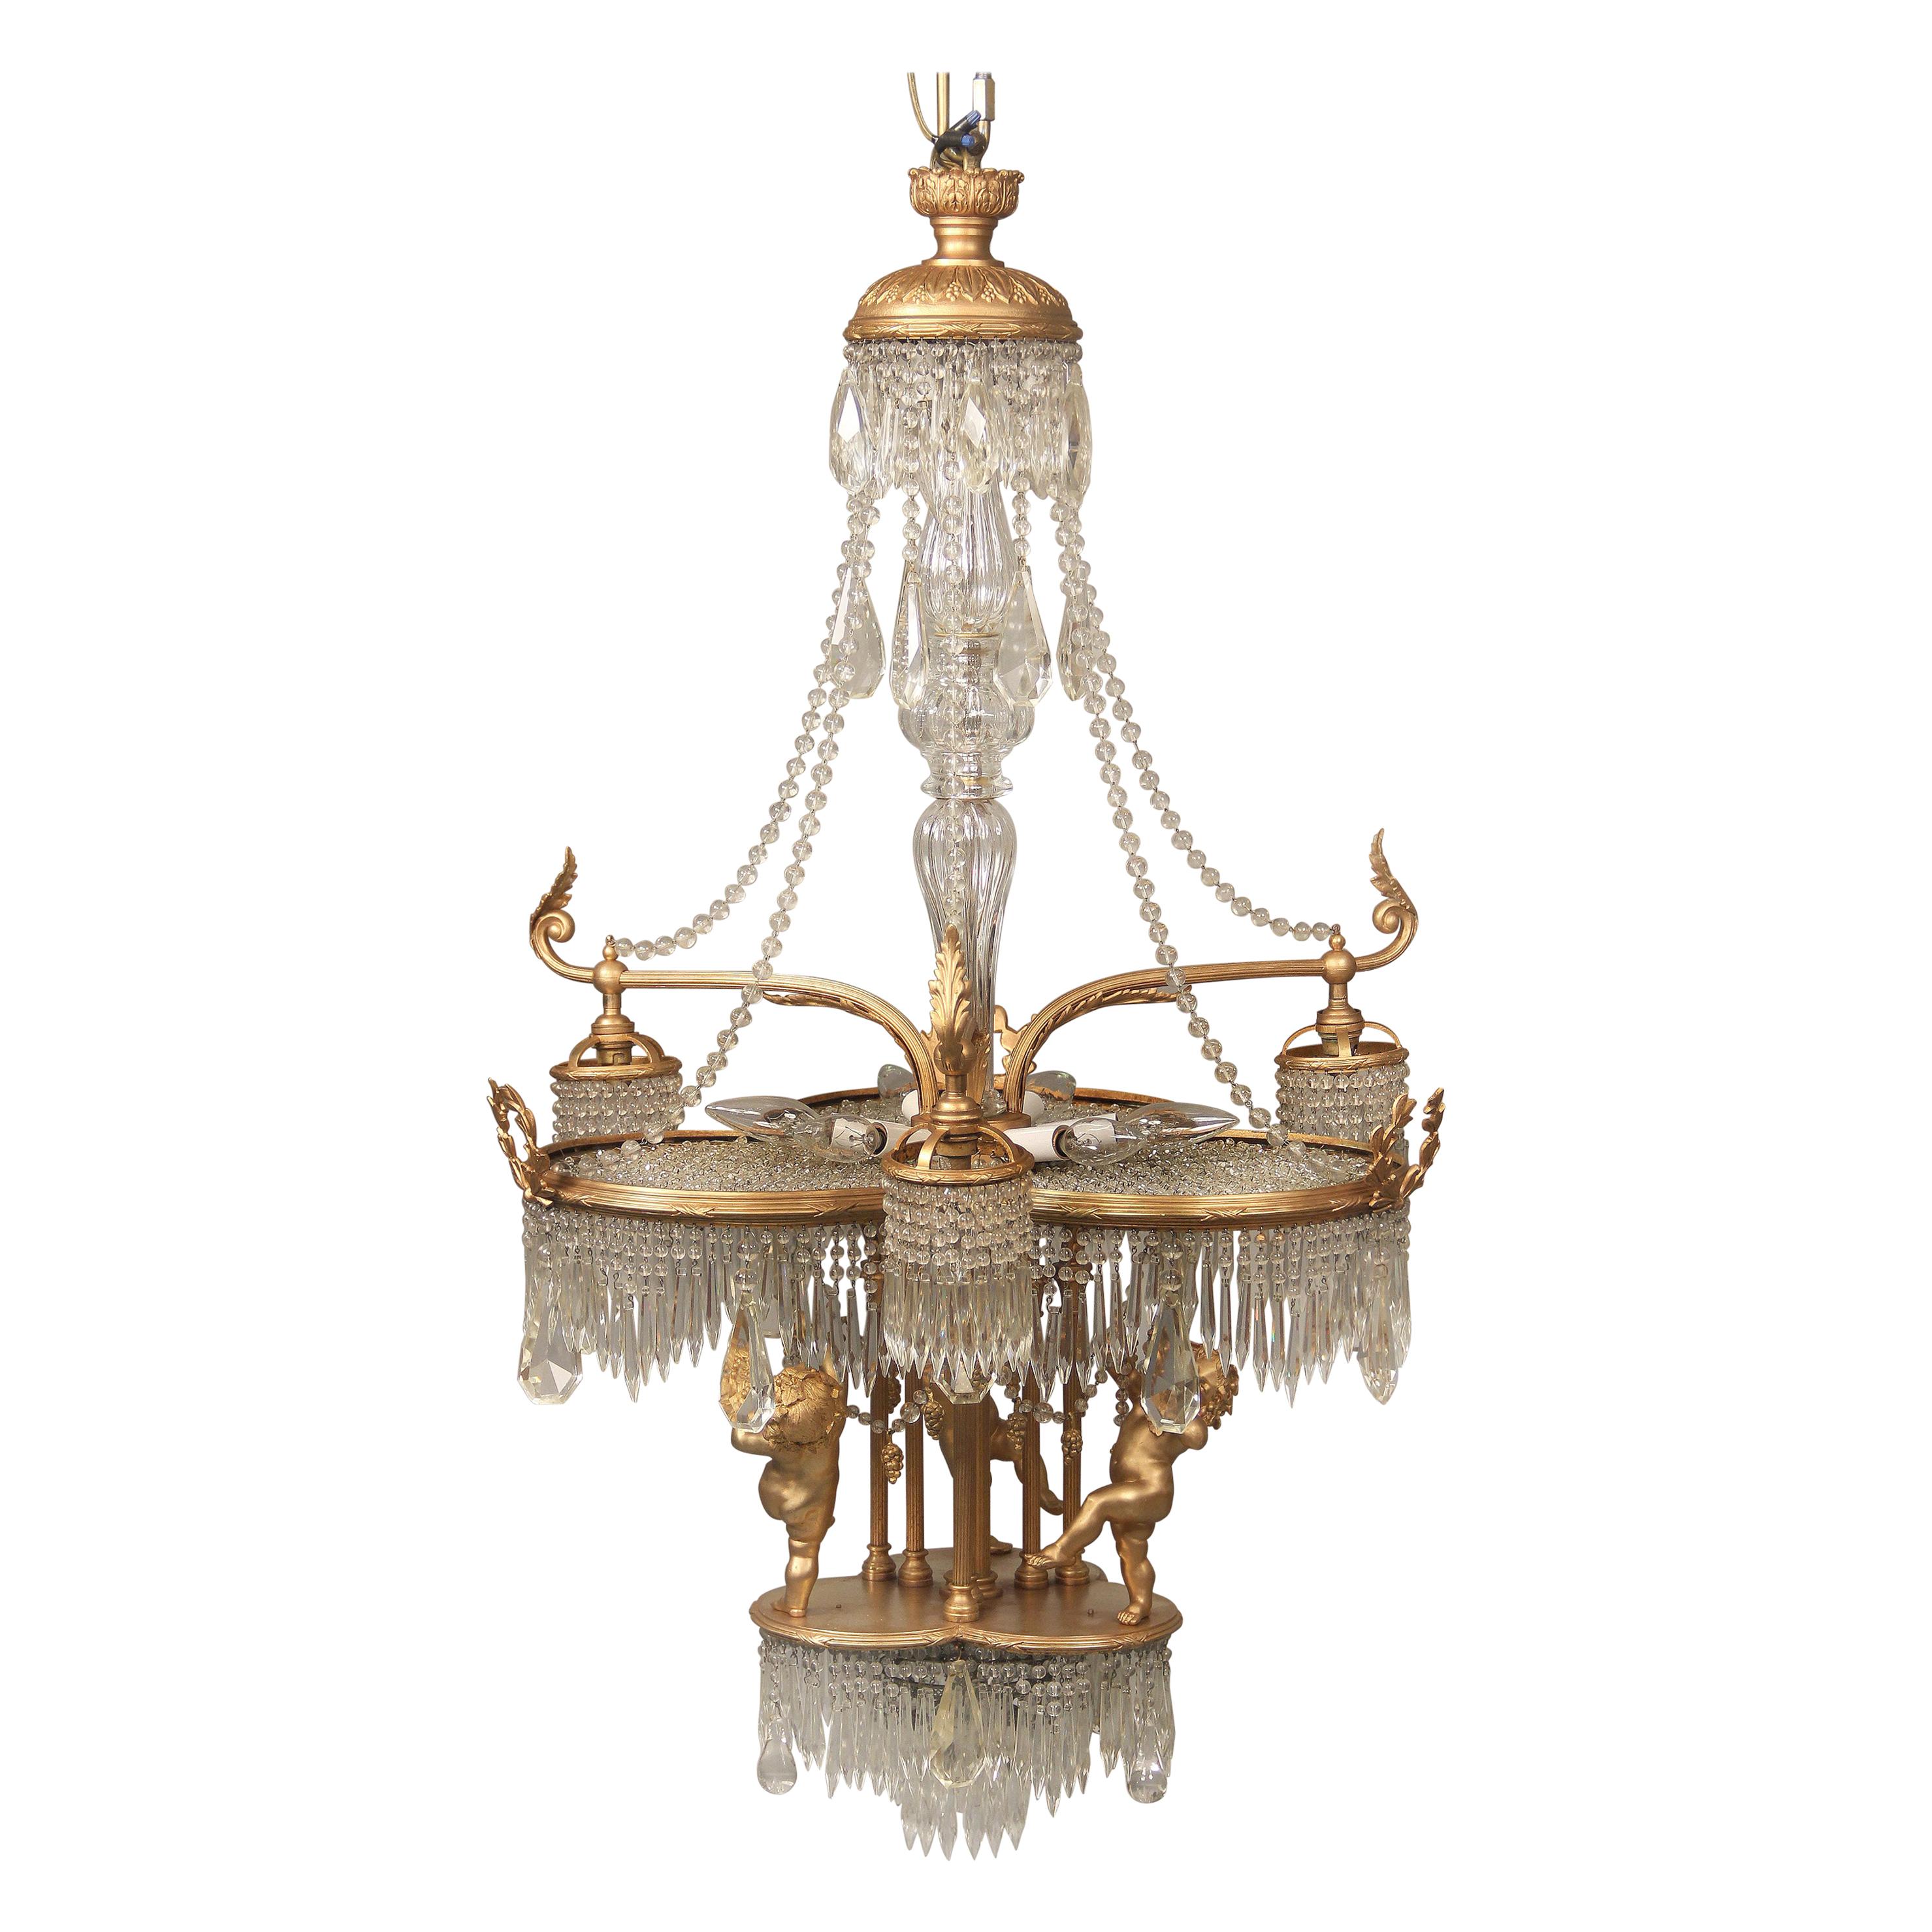 Wonderful Early 20th Century Gilt Bronze and Crystal Thirteen-Light Chandelier For Sale